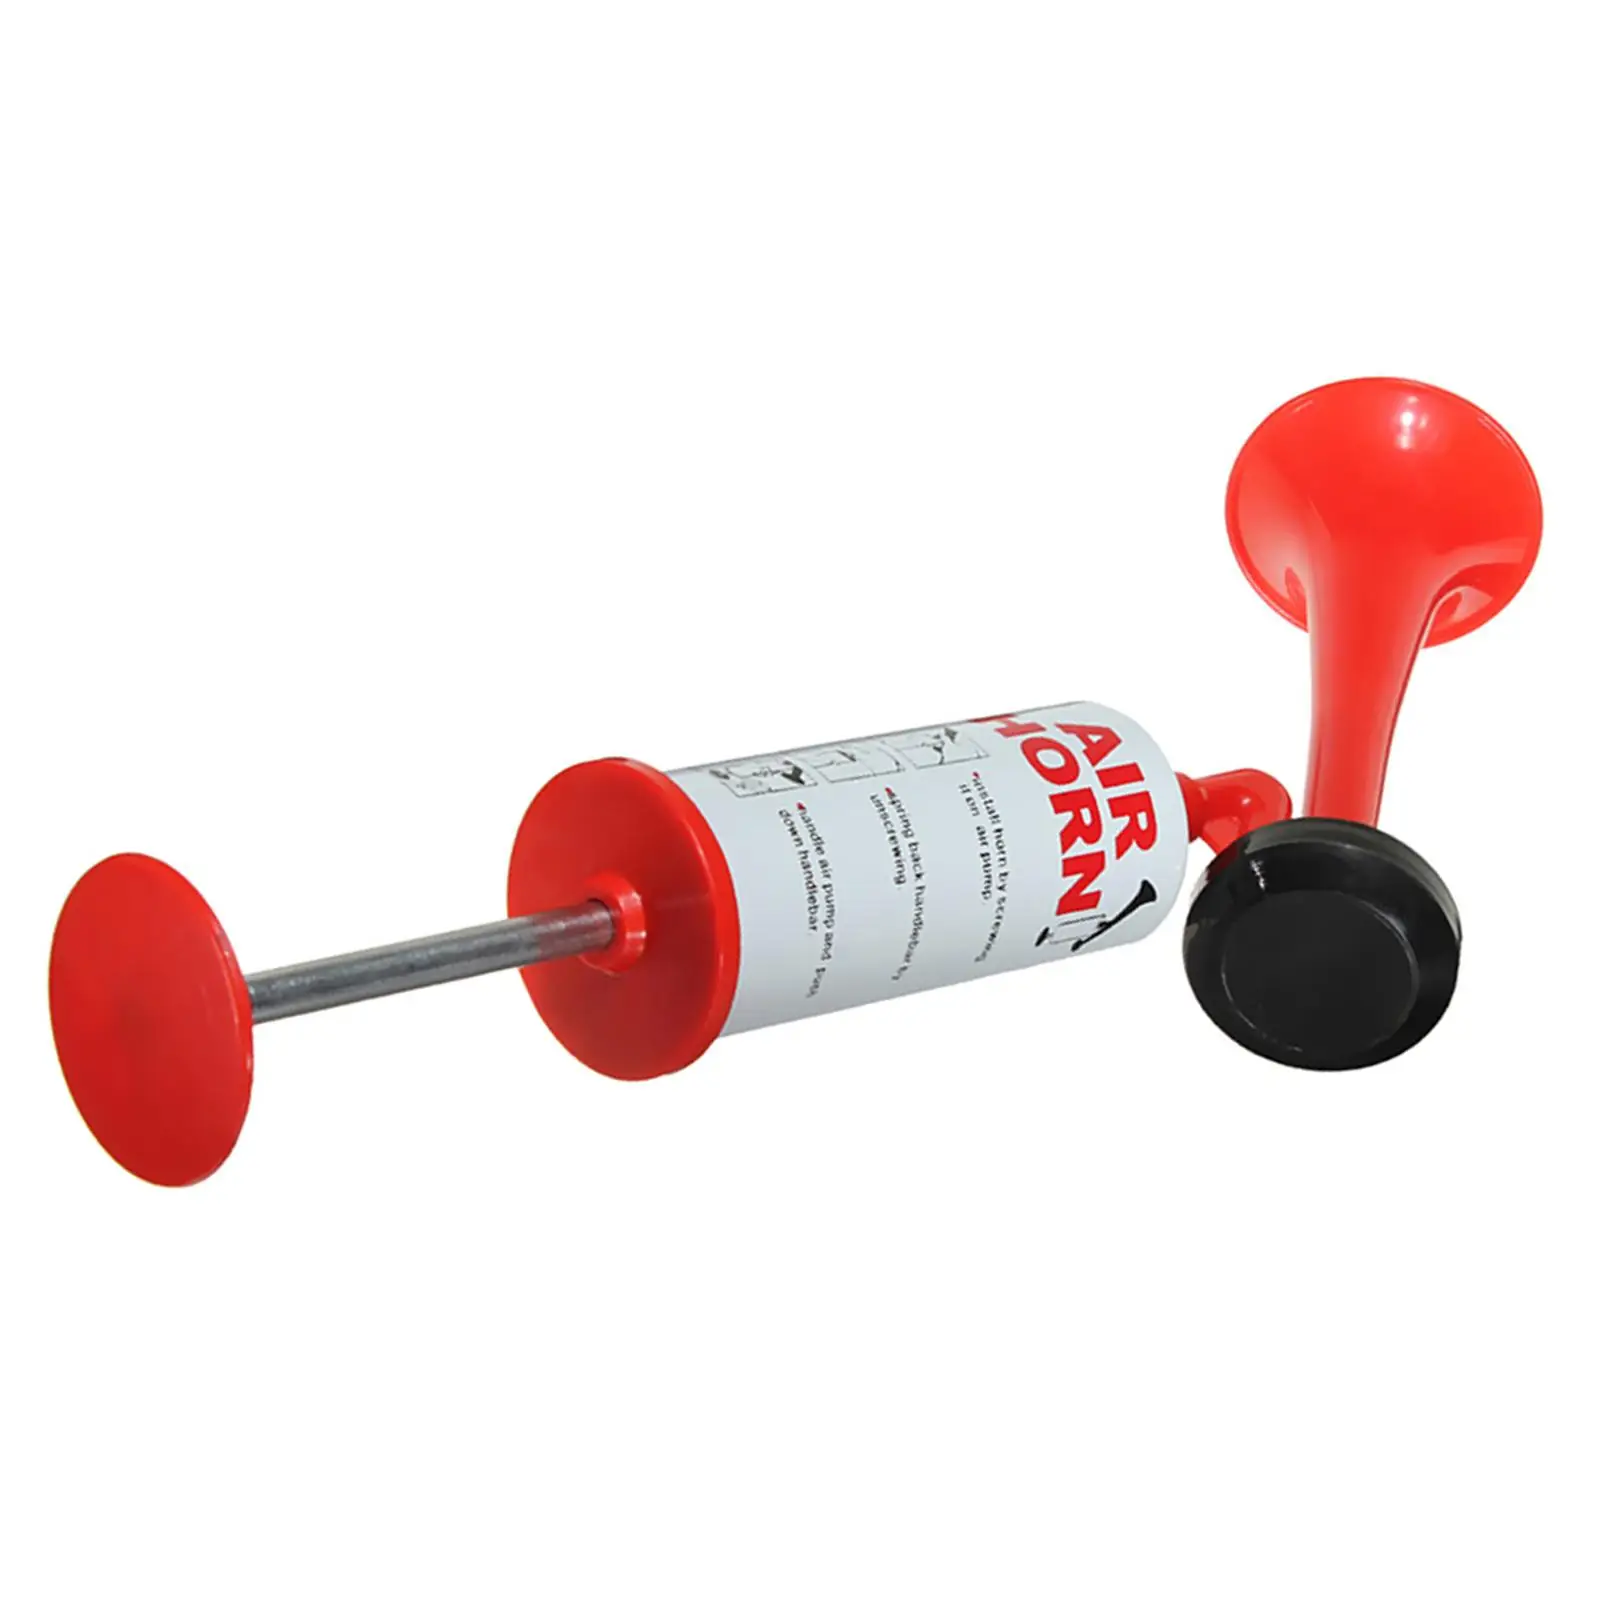 Air  Pump Trumpet for Car Boating Sports  Emergencies Parties High Quality